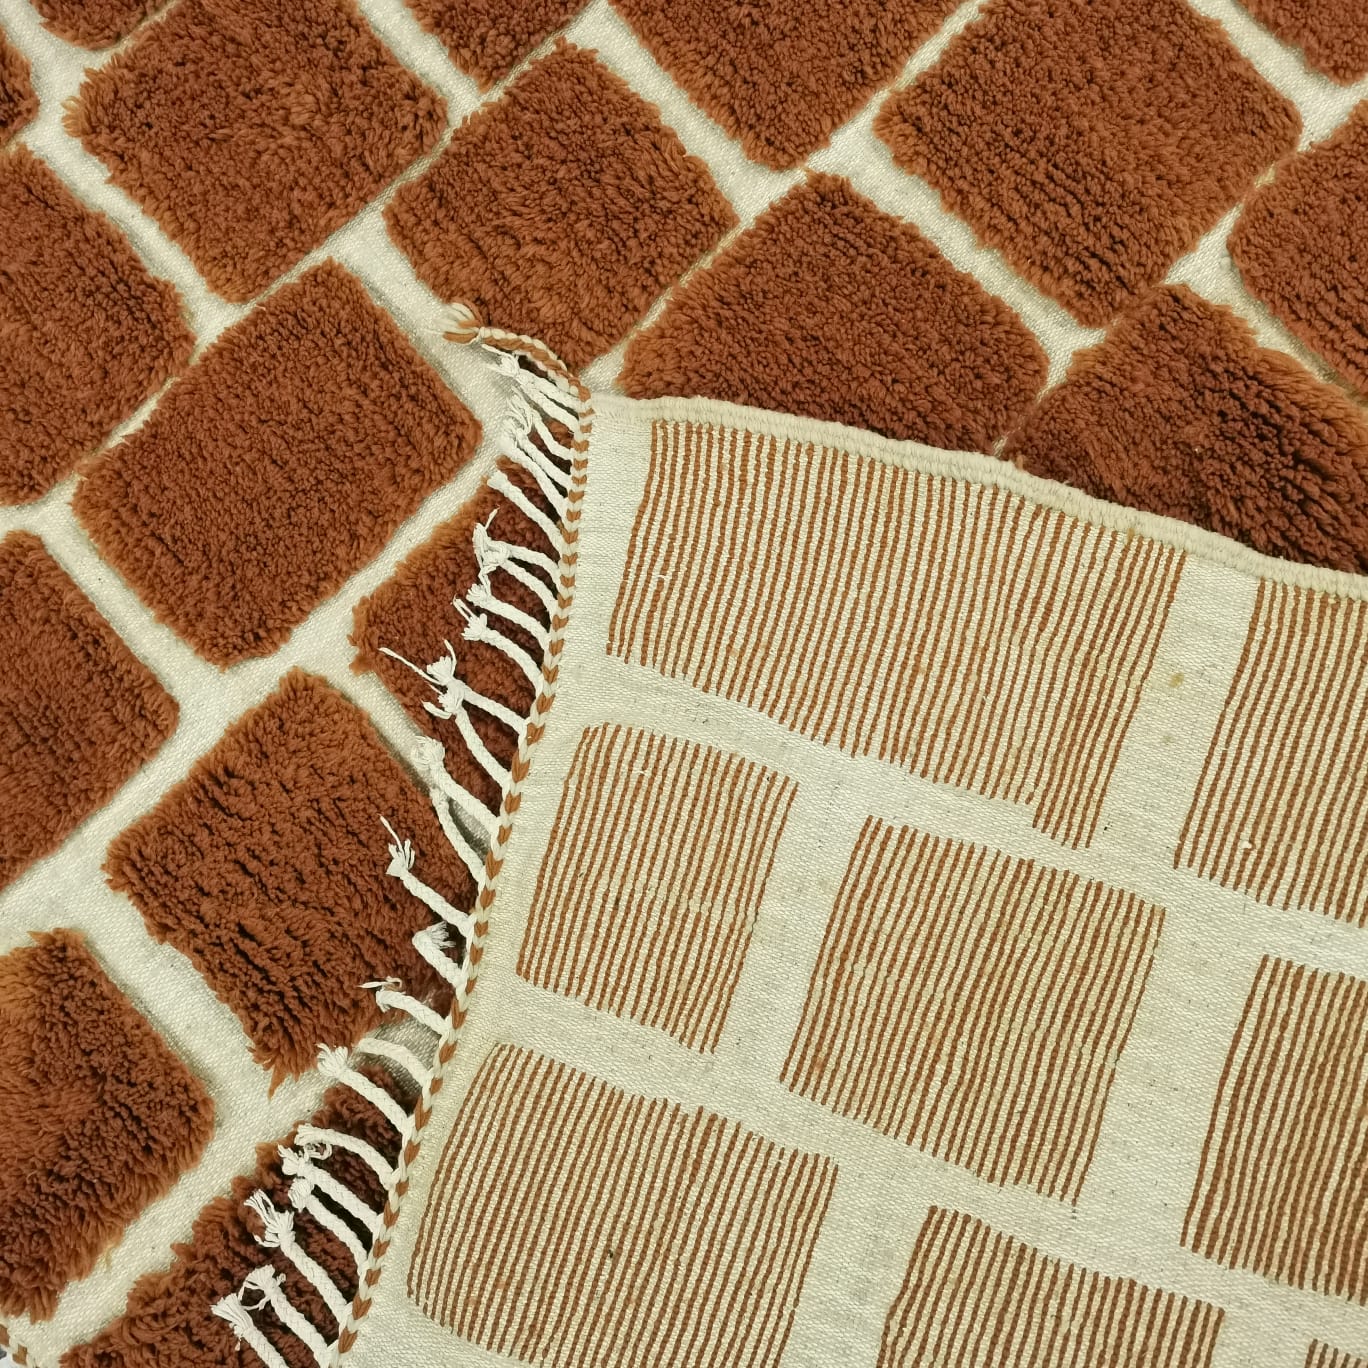 Enhance Your Home Luxurious Moroccan Area Rugs, Beni Ourain"